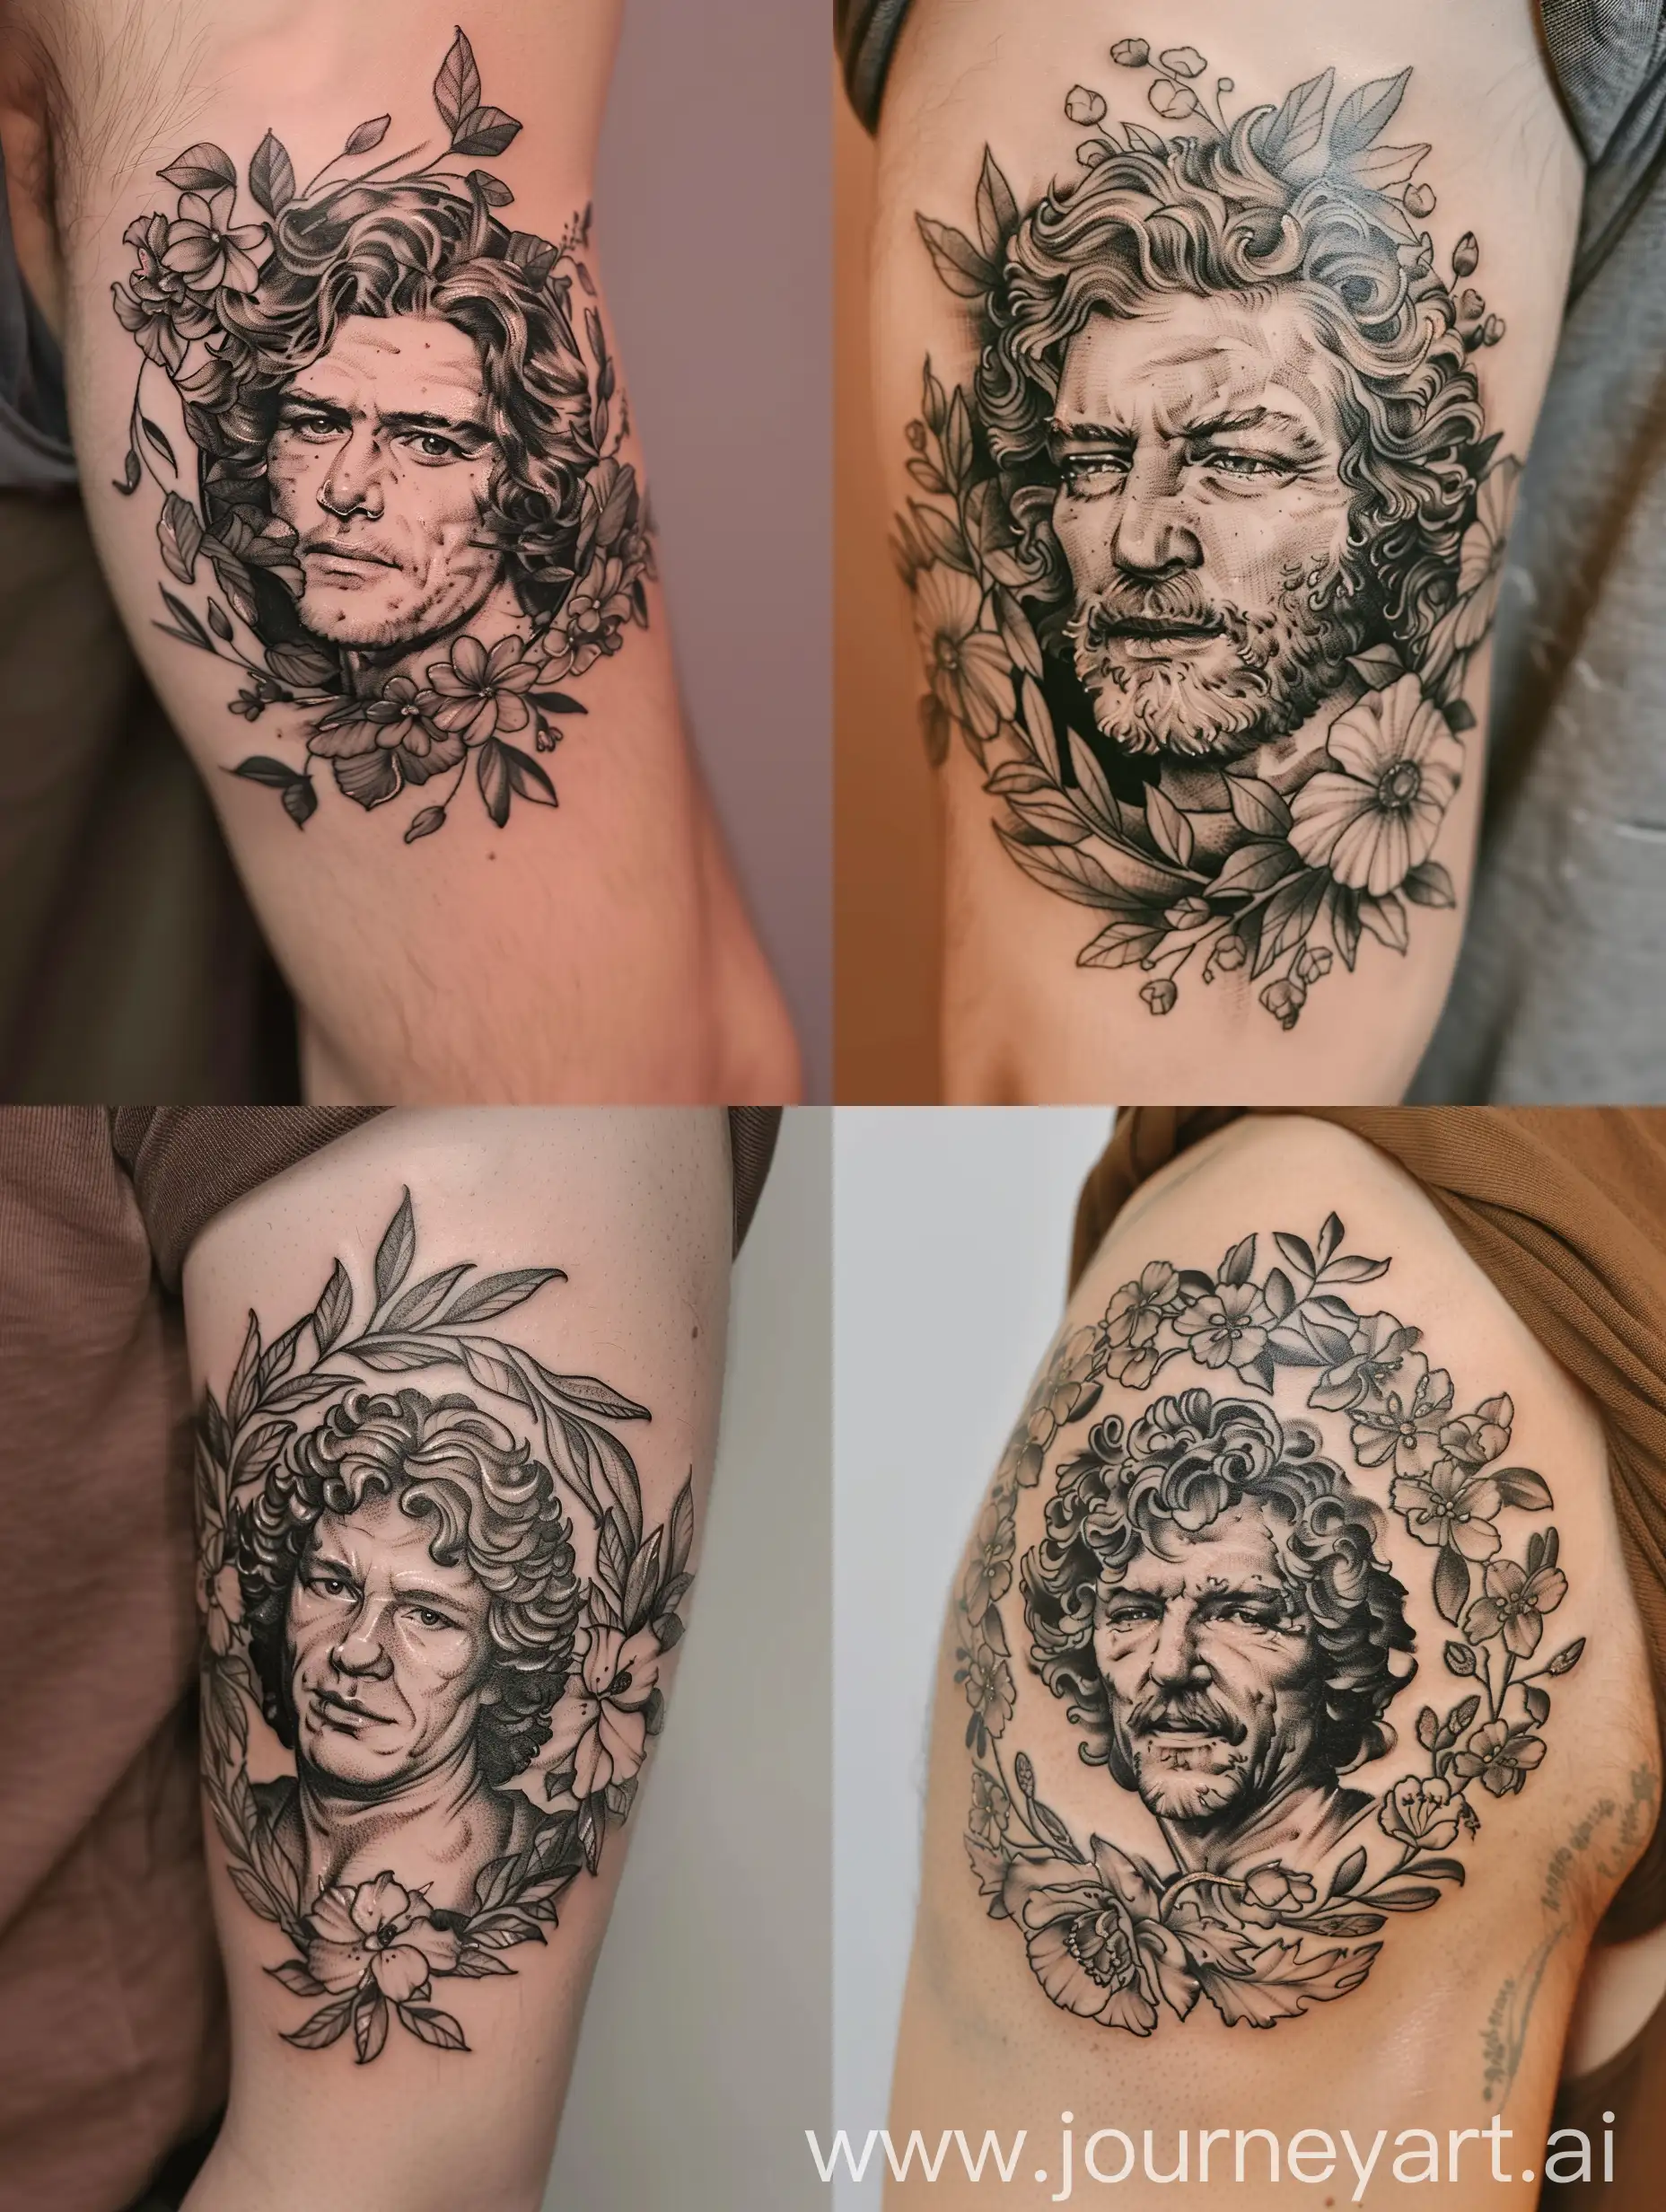 Realistic-Portrait-of-Robert-Plant-Surrounded-by-Flower-Wreath